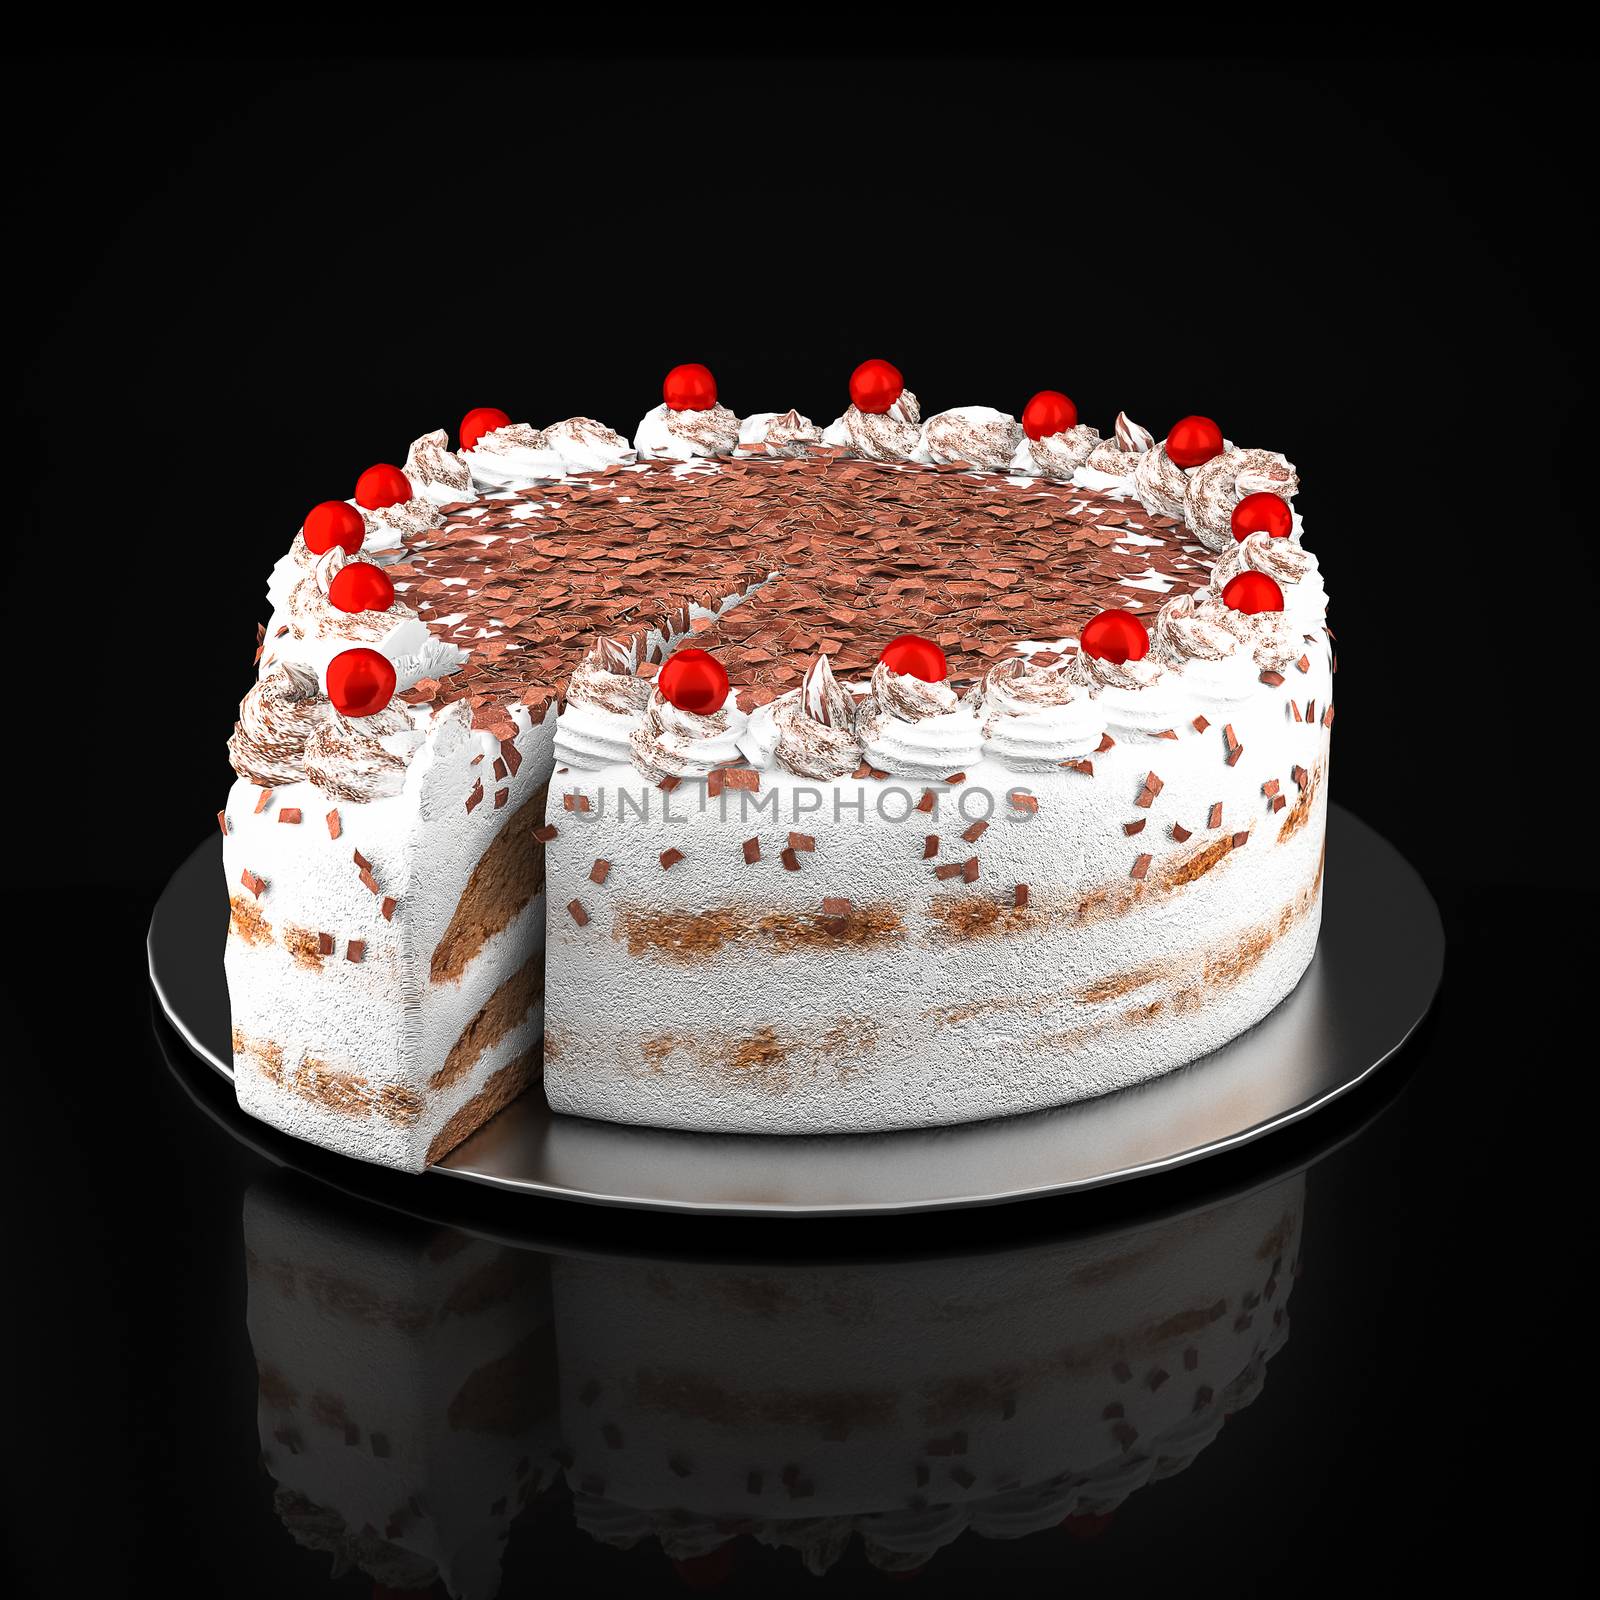 Cake with chocolate chips on a black background